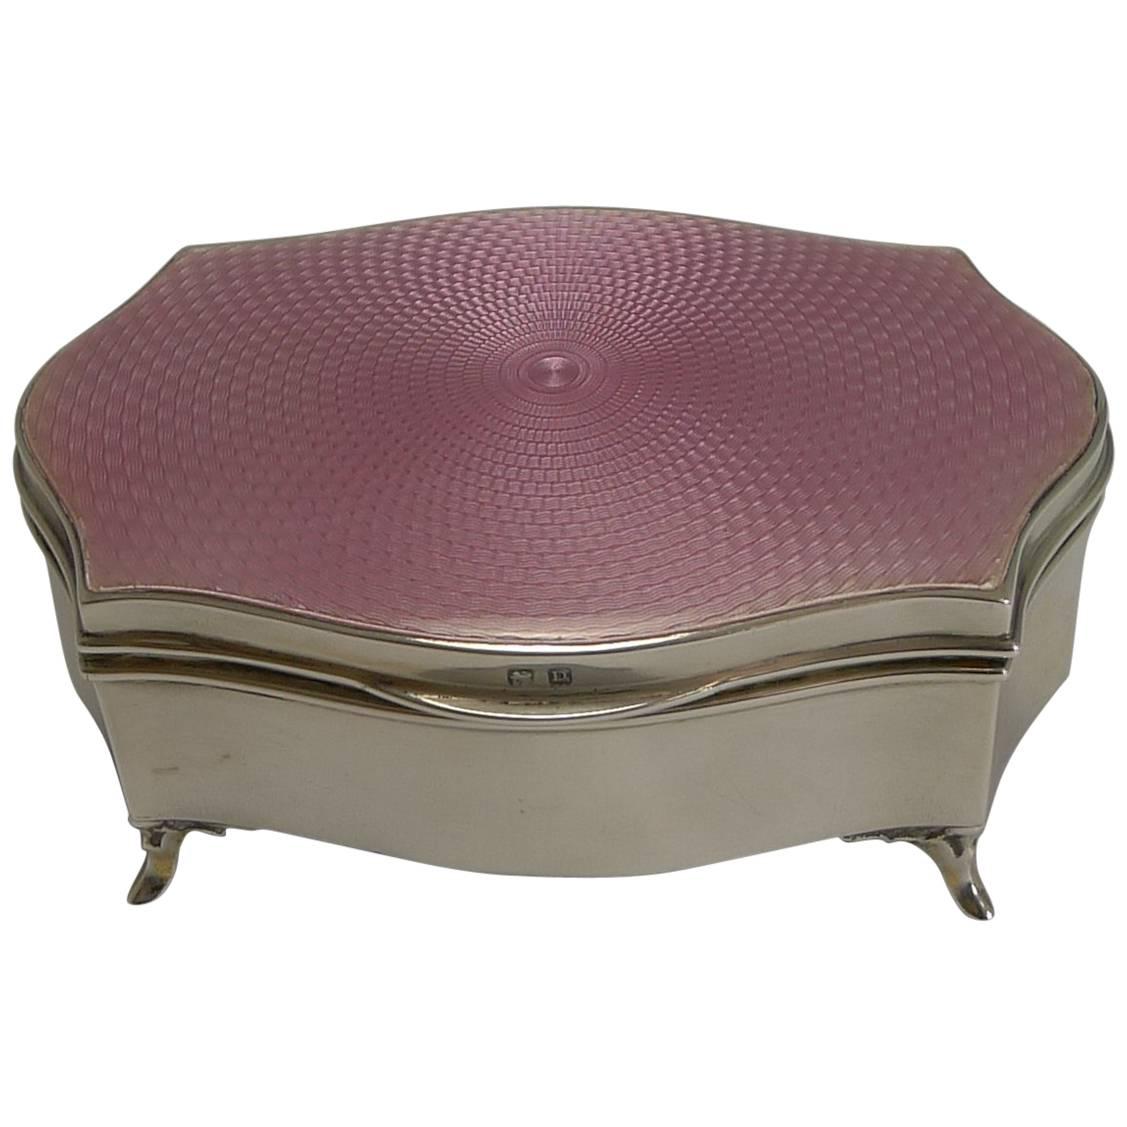 Silver and Pink Guilloche Enamel Jewelry Box by Asprey, London